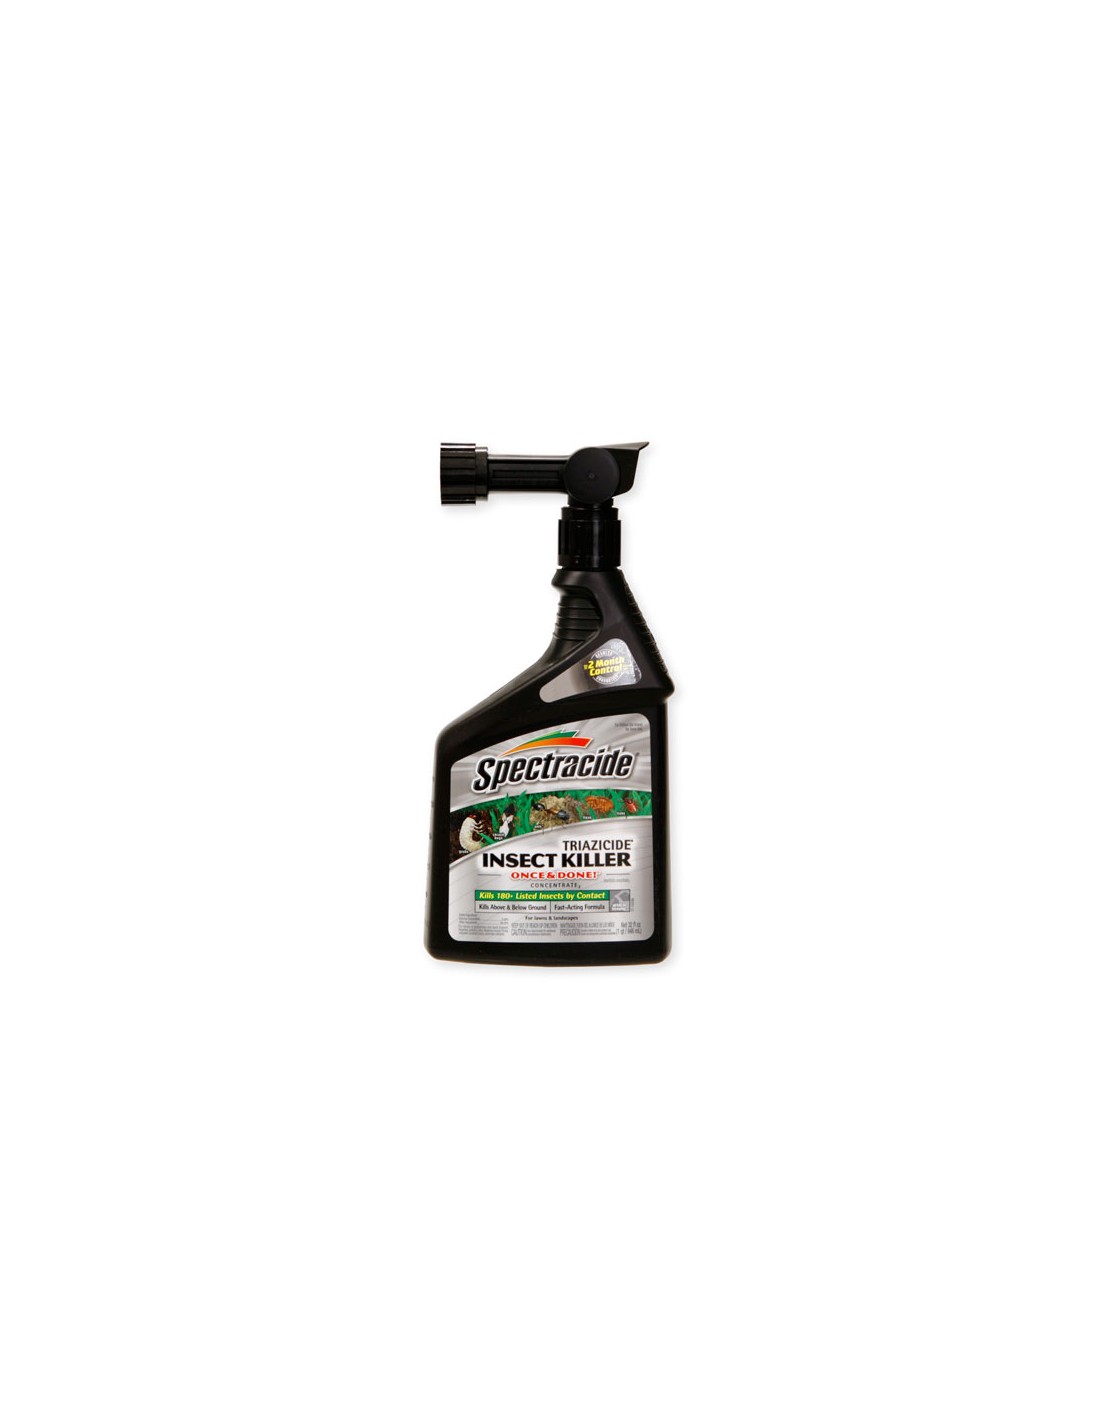 Spectracide Triazicide Insect Killer Concentrate RTS Questions & Answers